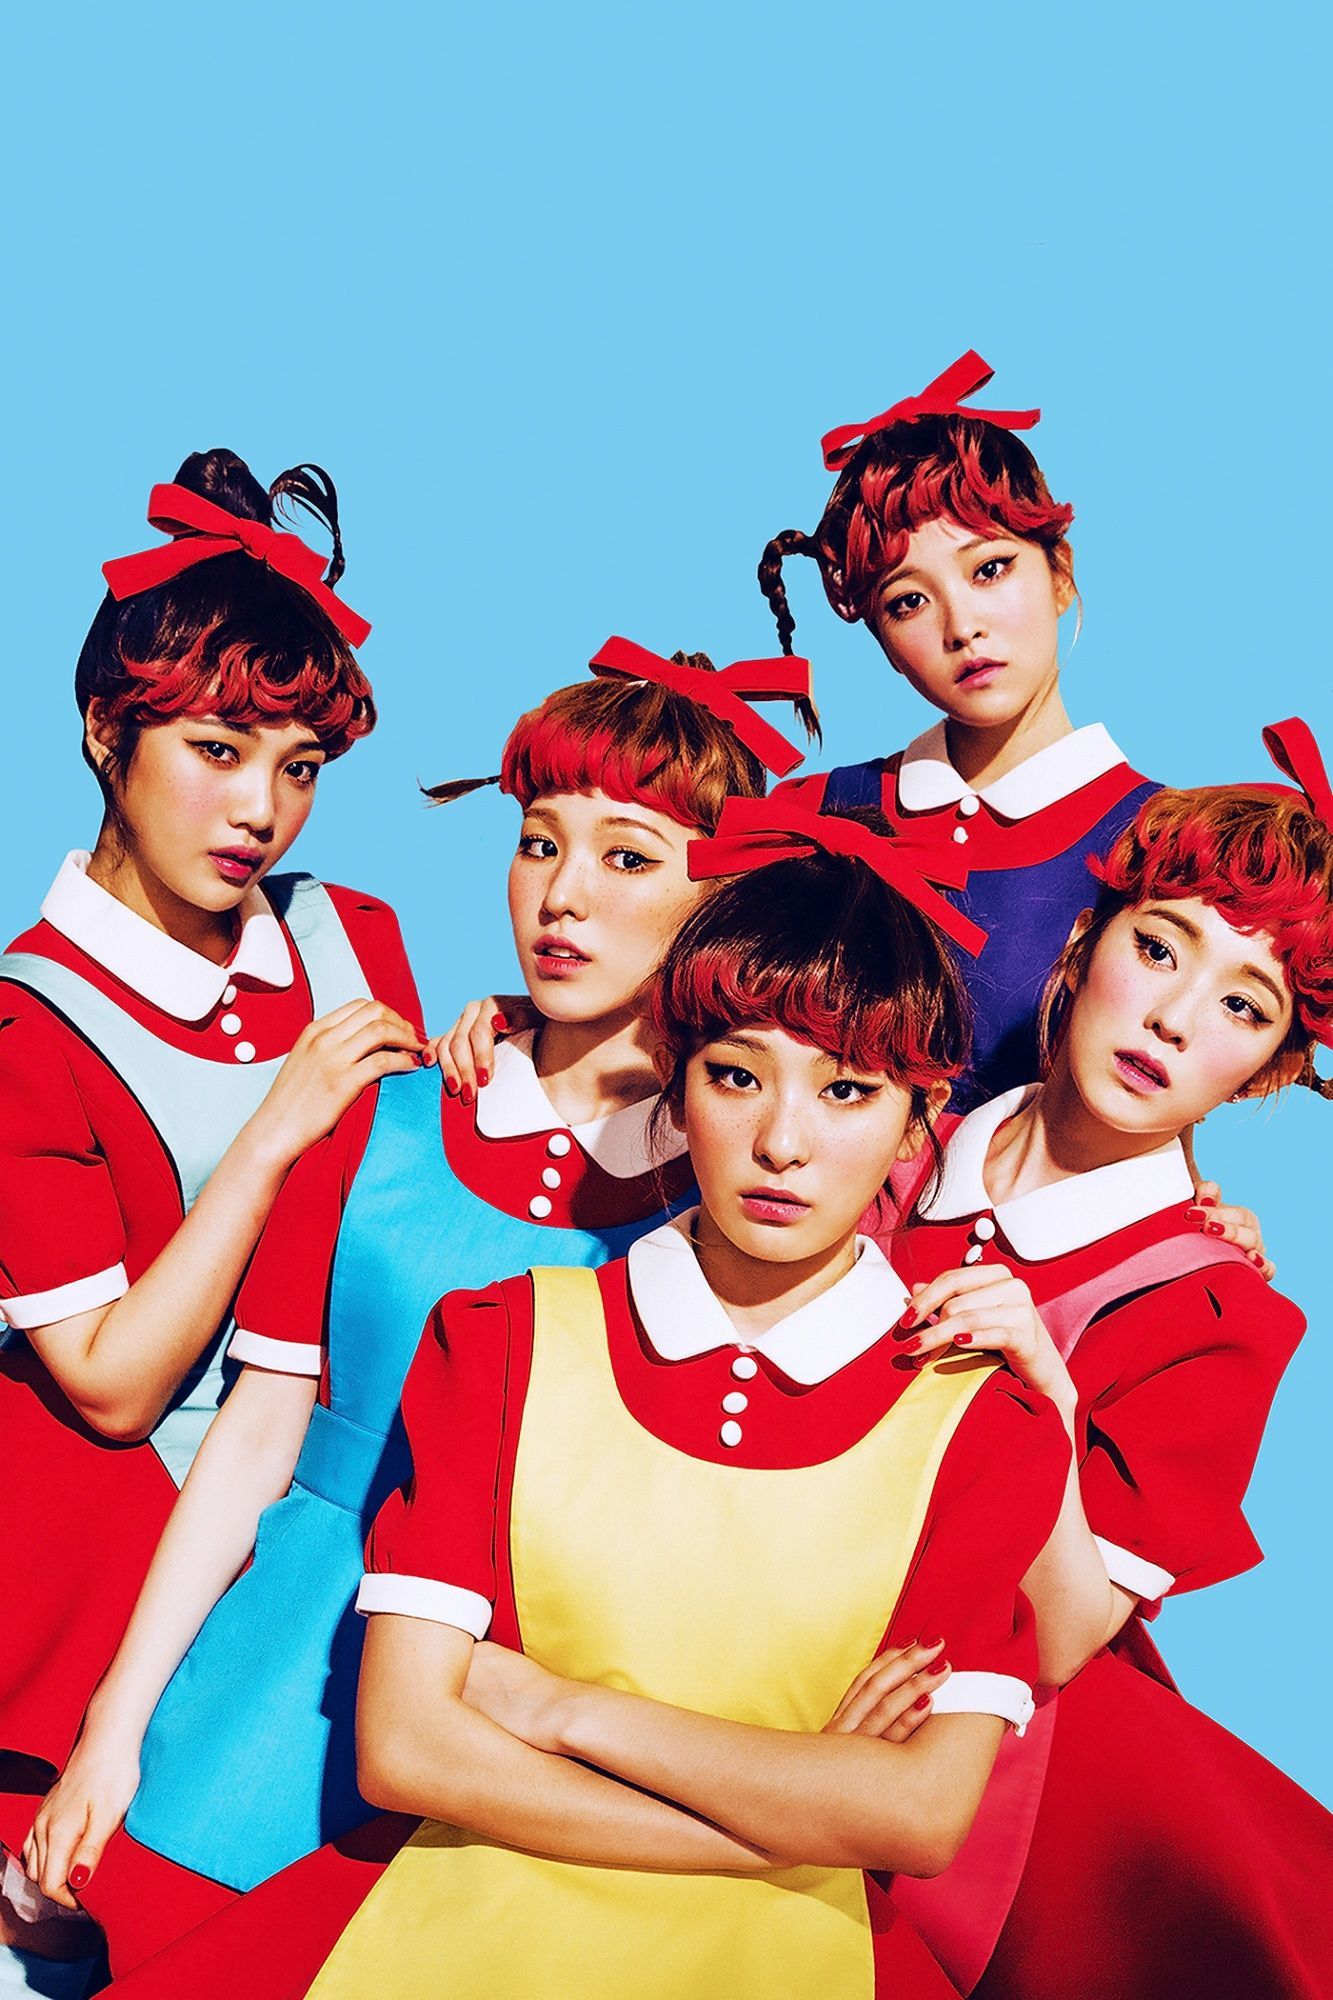 Red Velvet Rookie wallpaper perfect iphone background omg